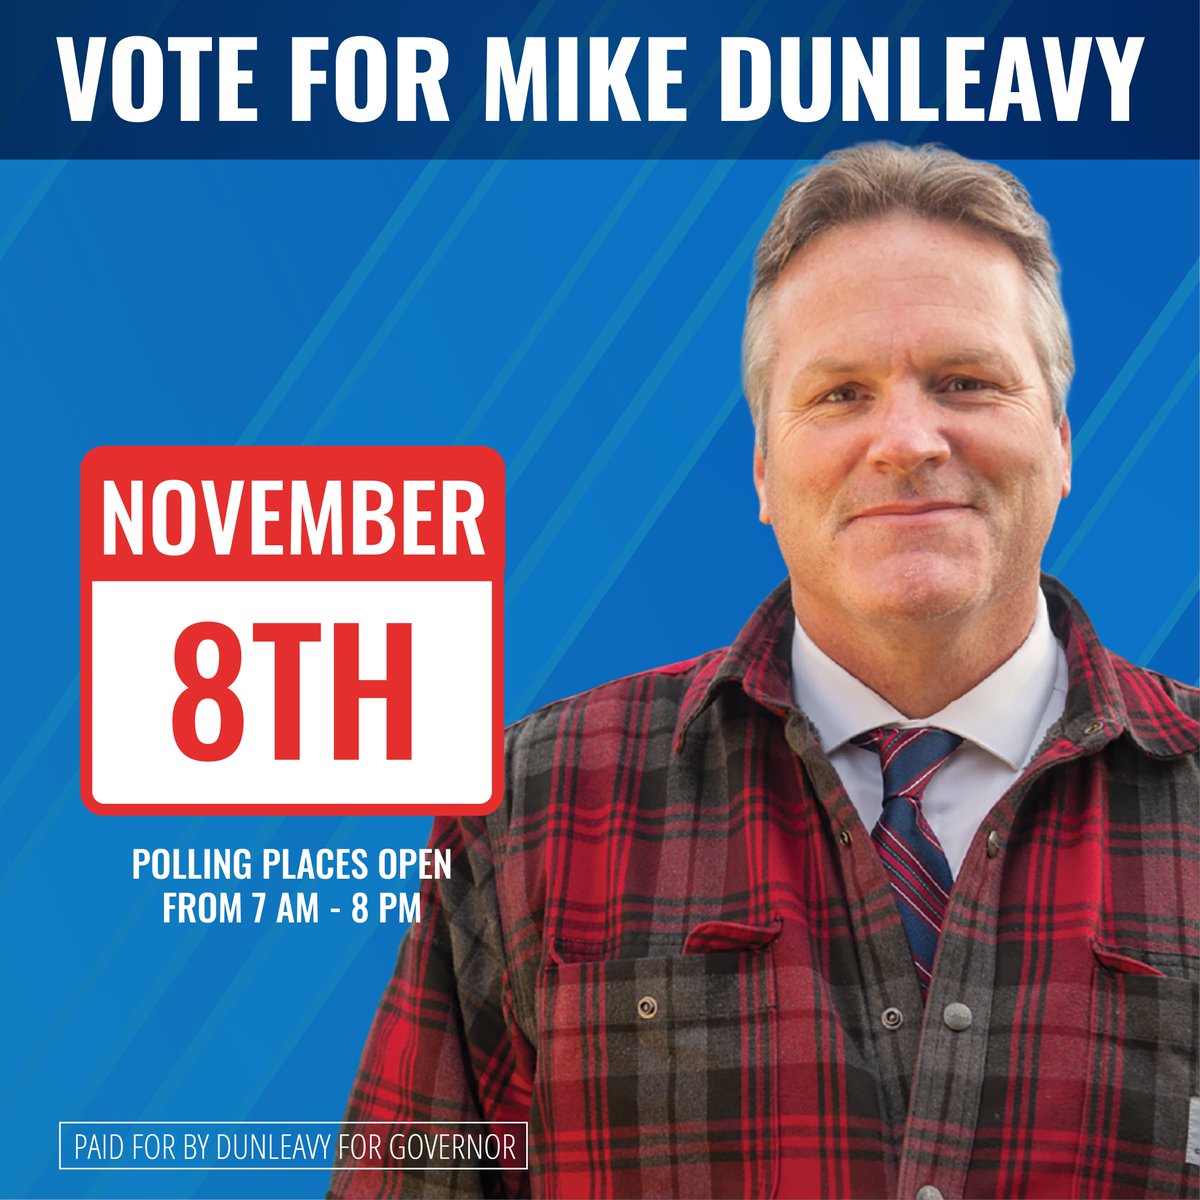 REMINDER! The last day to vote is November 8th. View your polling locations here: elections.alaska.gov/avo/